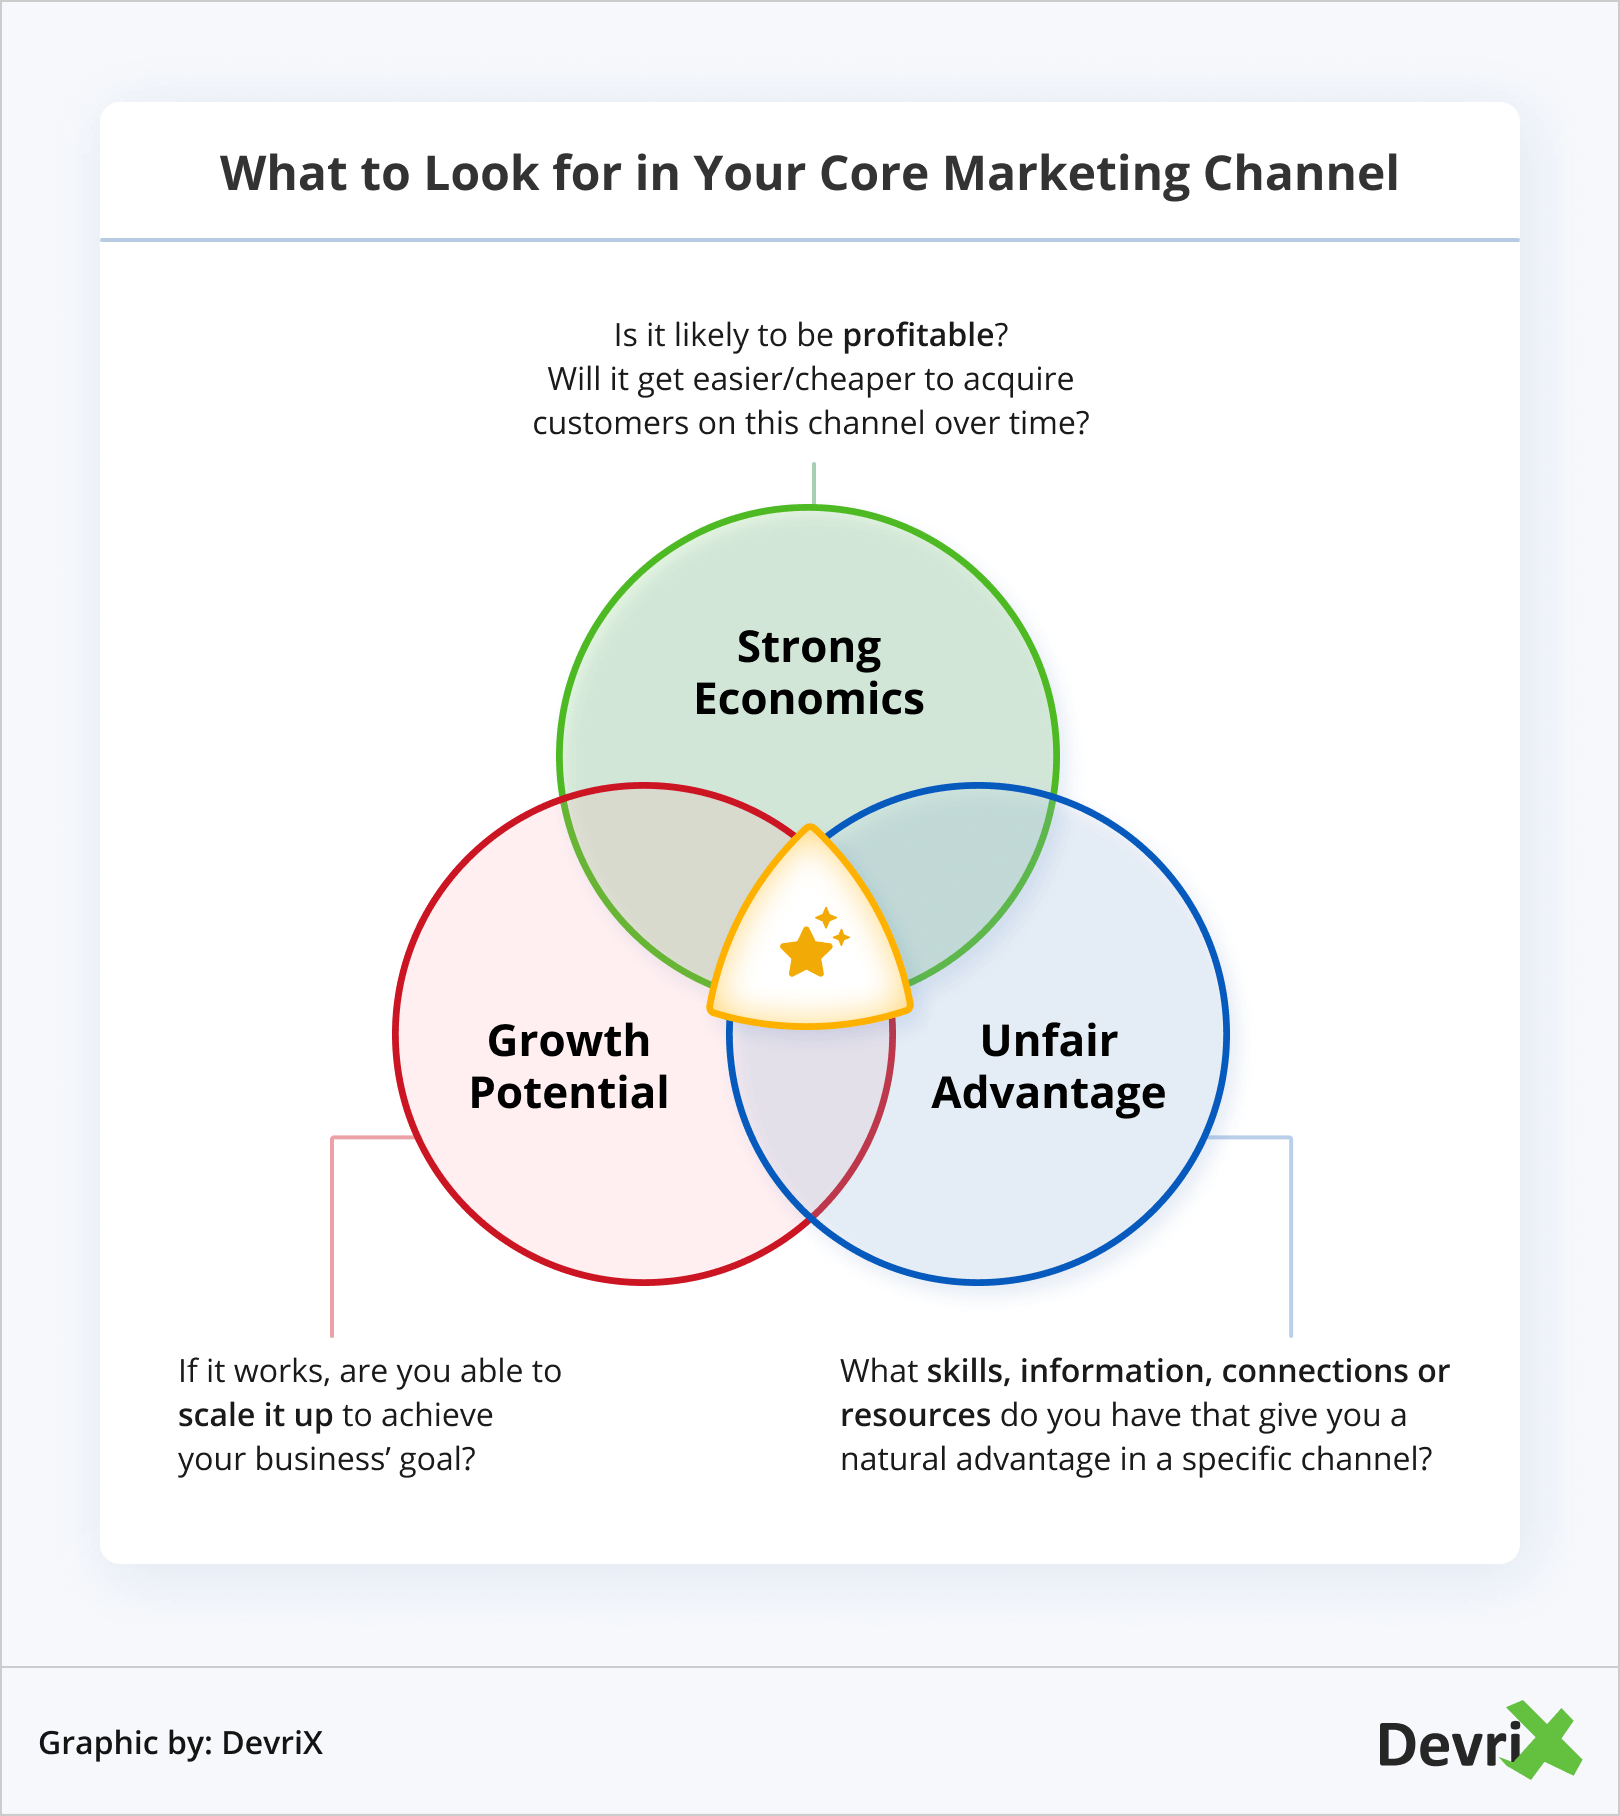 What to Look for in Your Core Marketing Channel